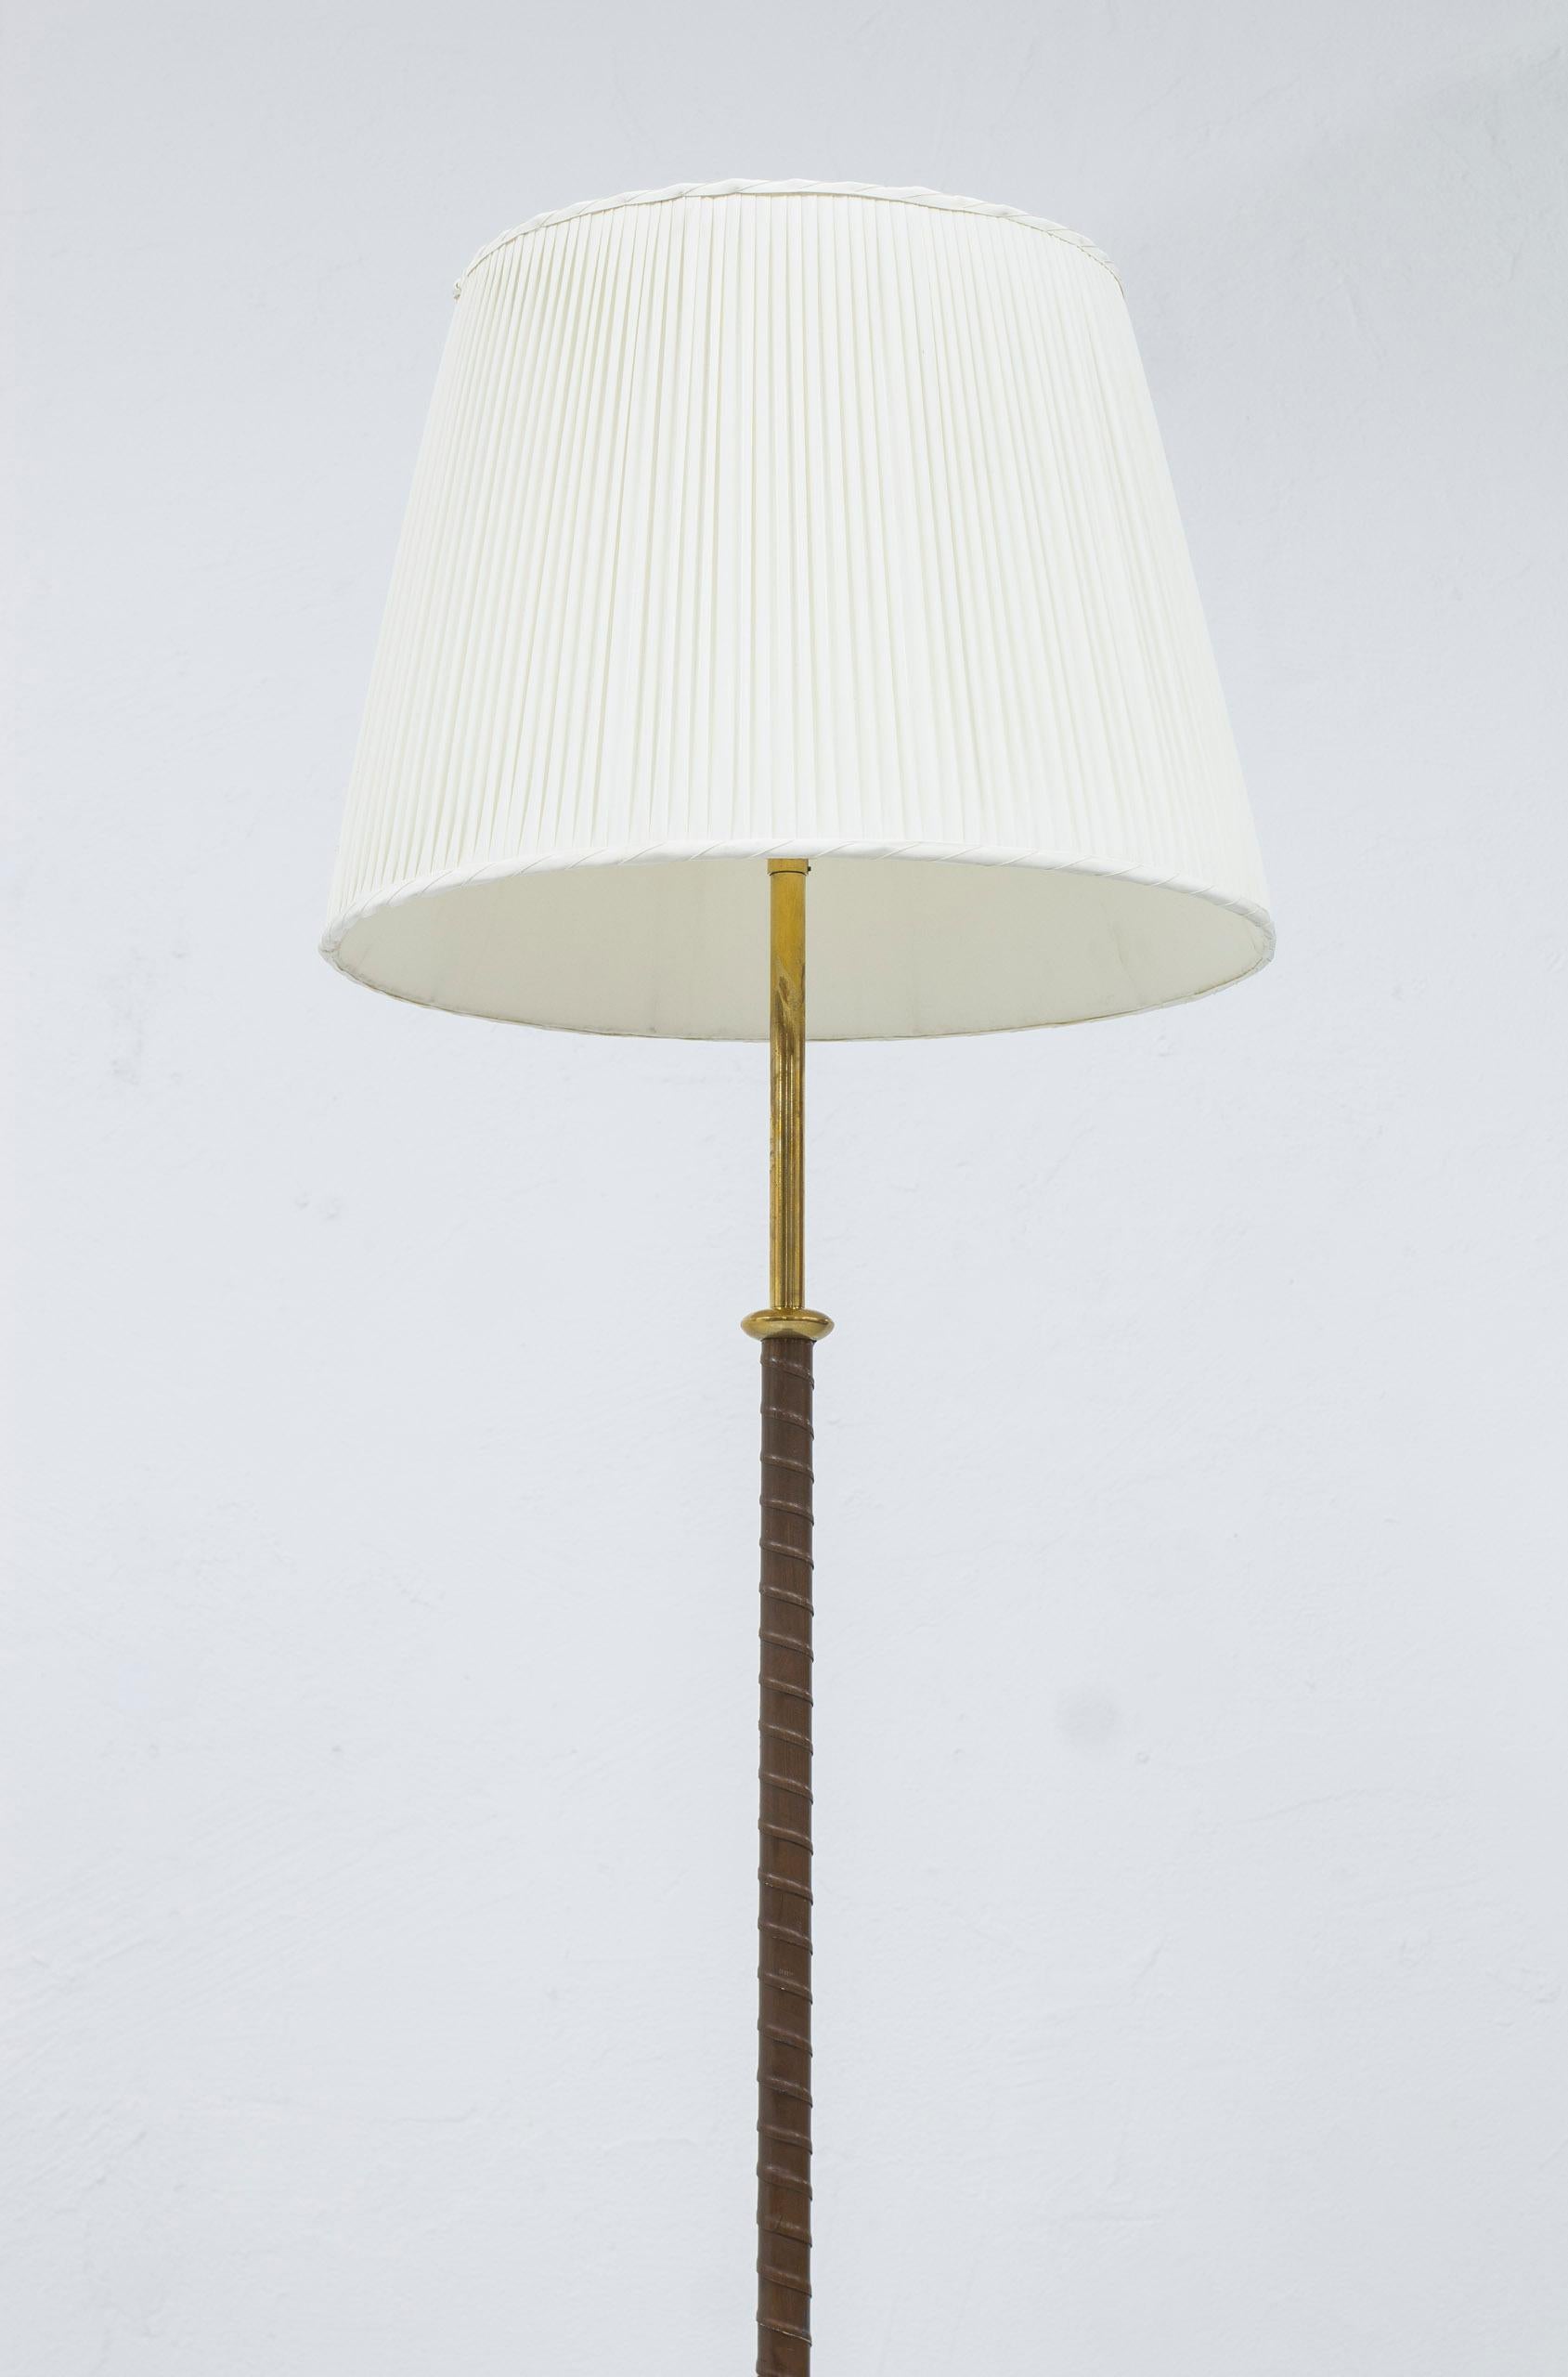 Scandinavian Modern Floor lamp with leather and brass by Harald Notini, Böhlmarks, Sweden, 1950s For Sale